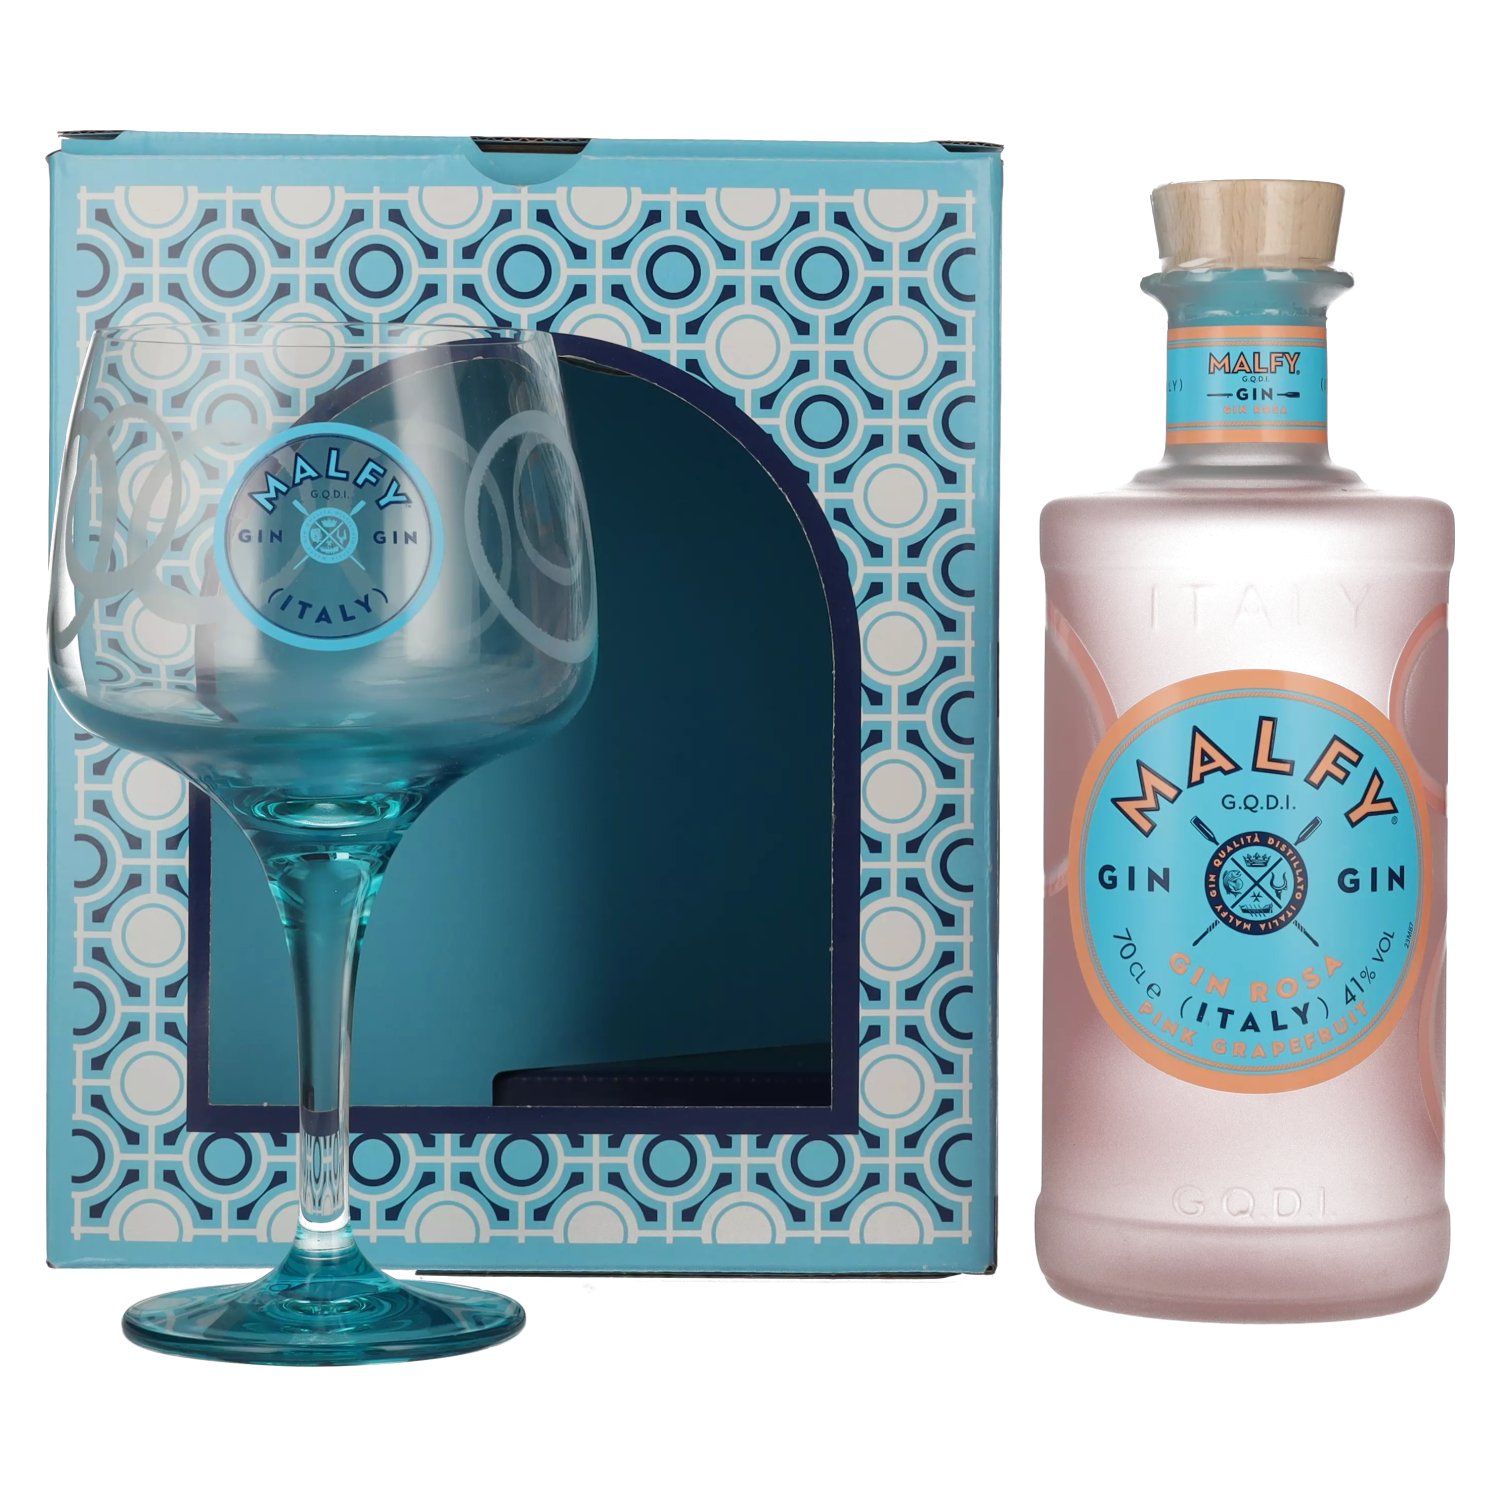 Malfy Gin 0,7l Sicilian Grapefruit Vol. glass ROSA in Pink Giftbox 41% with